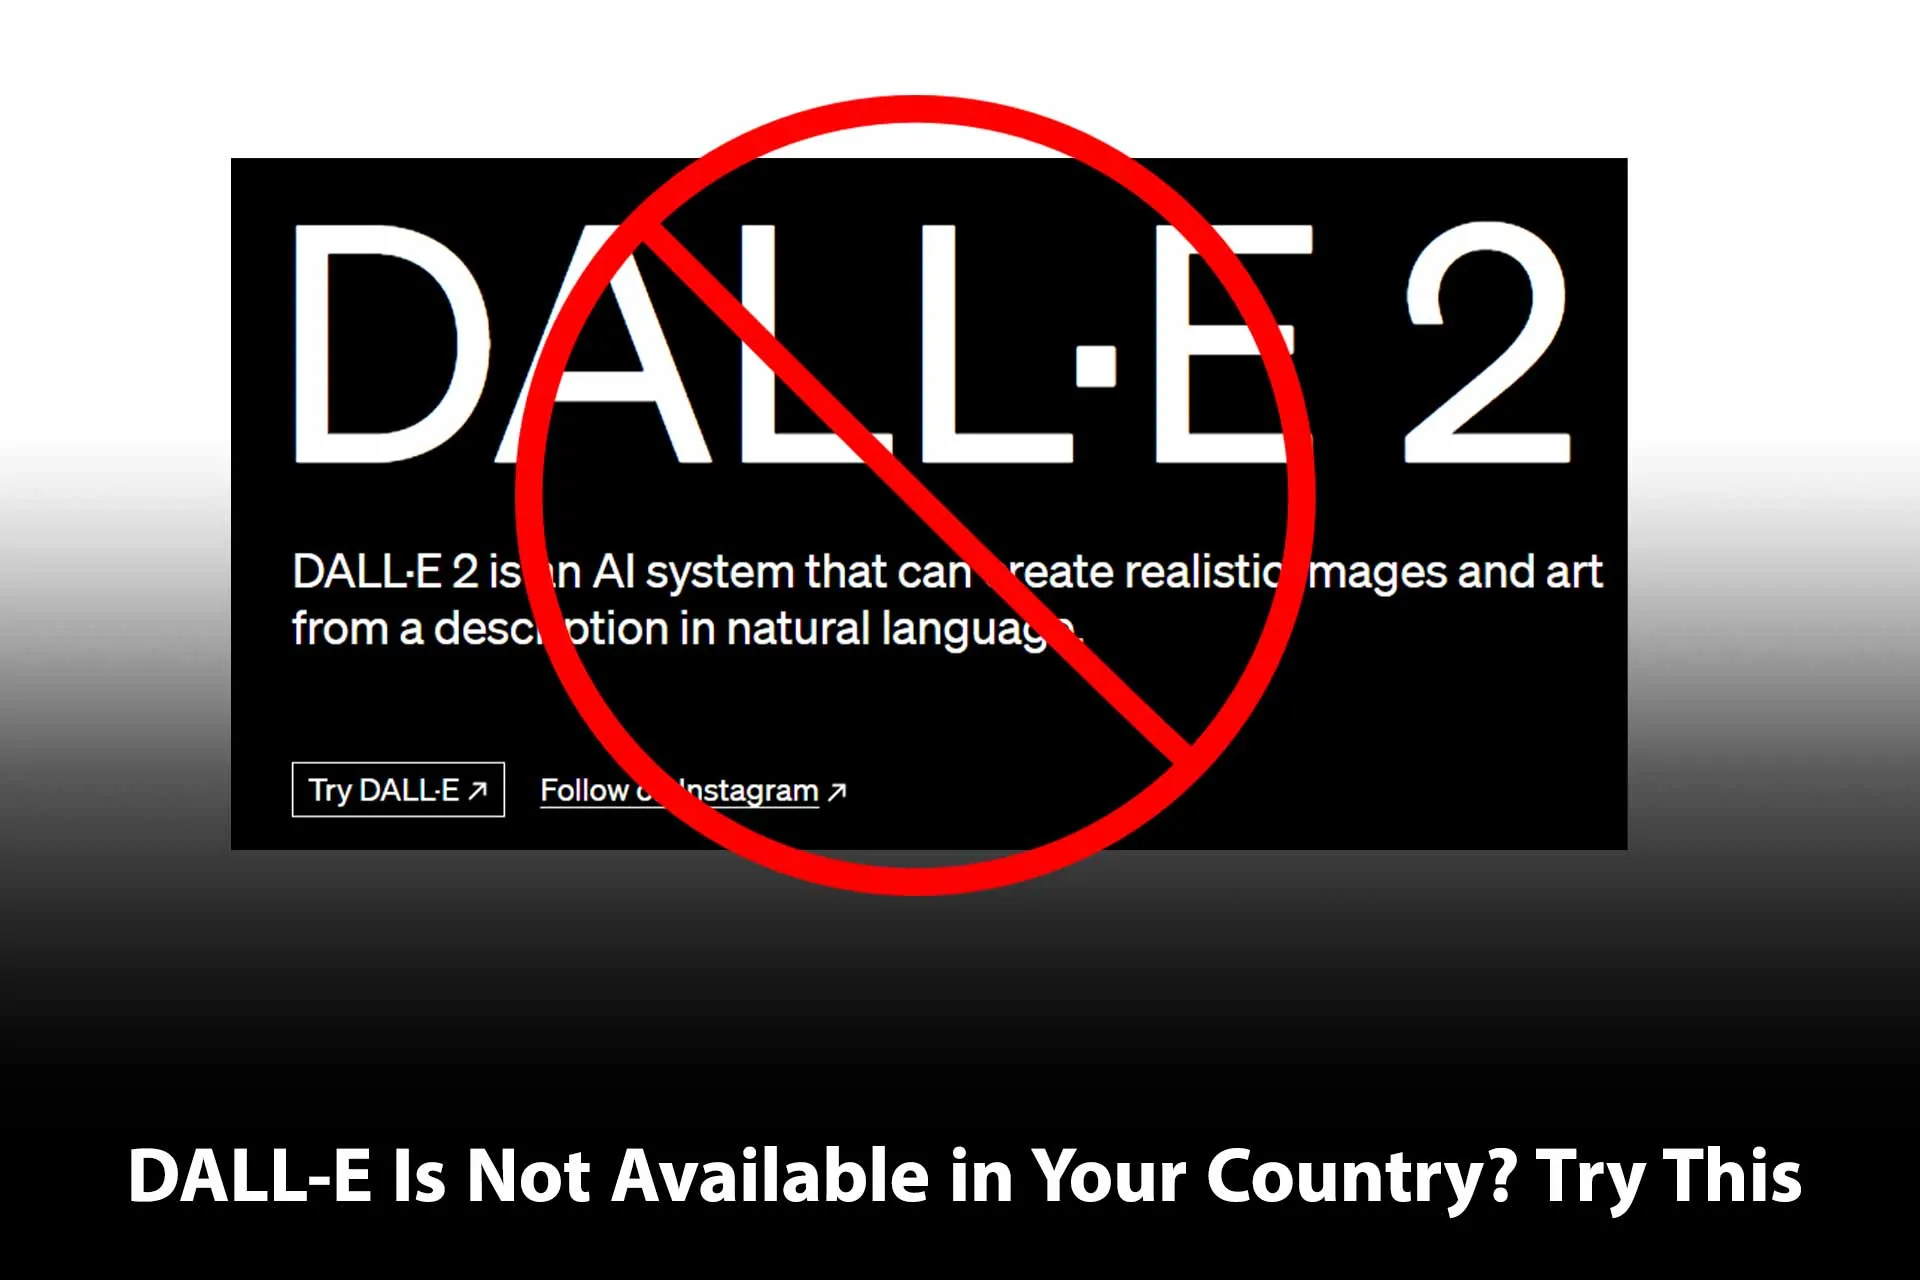 DALL-E is not Available in your Country